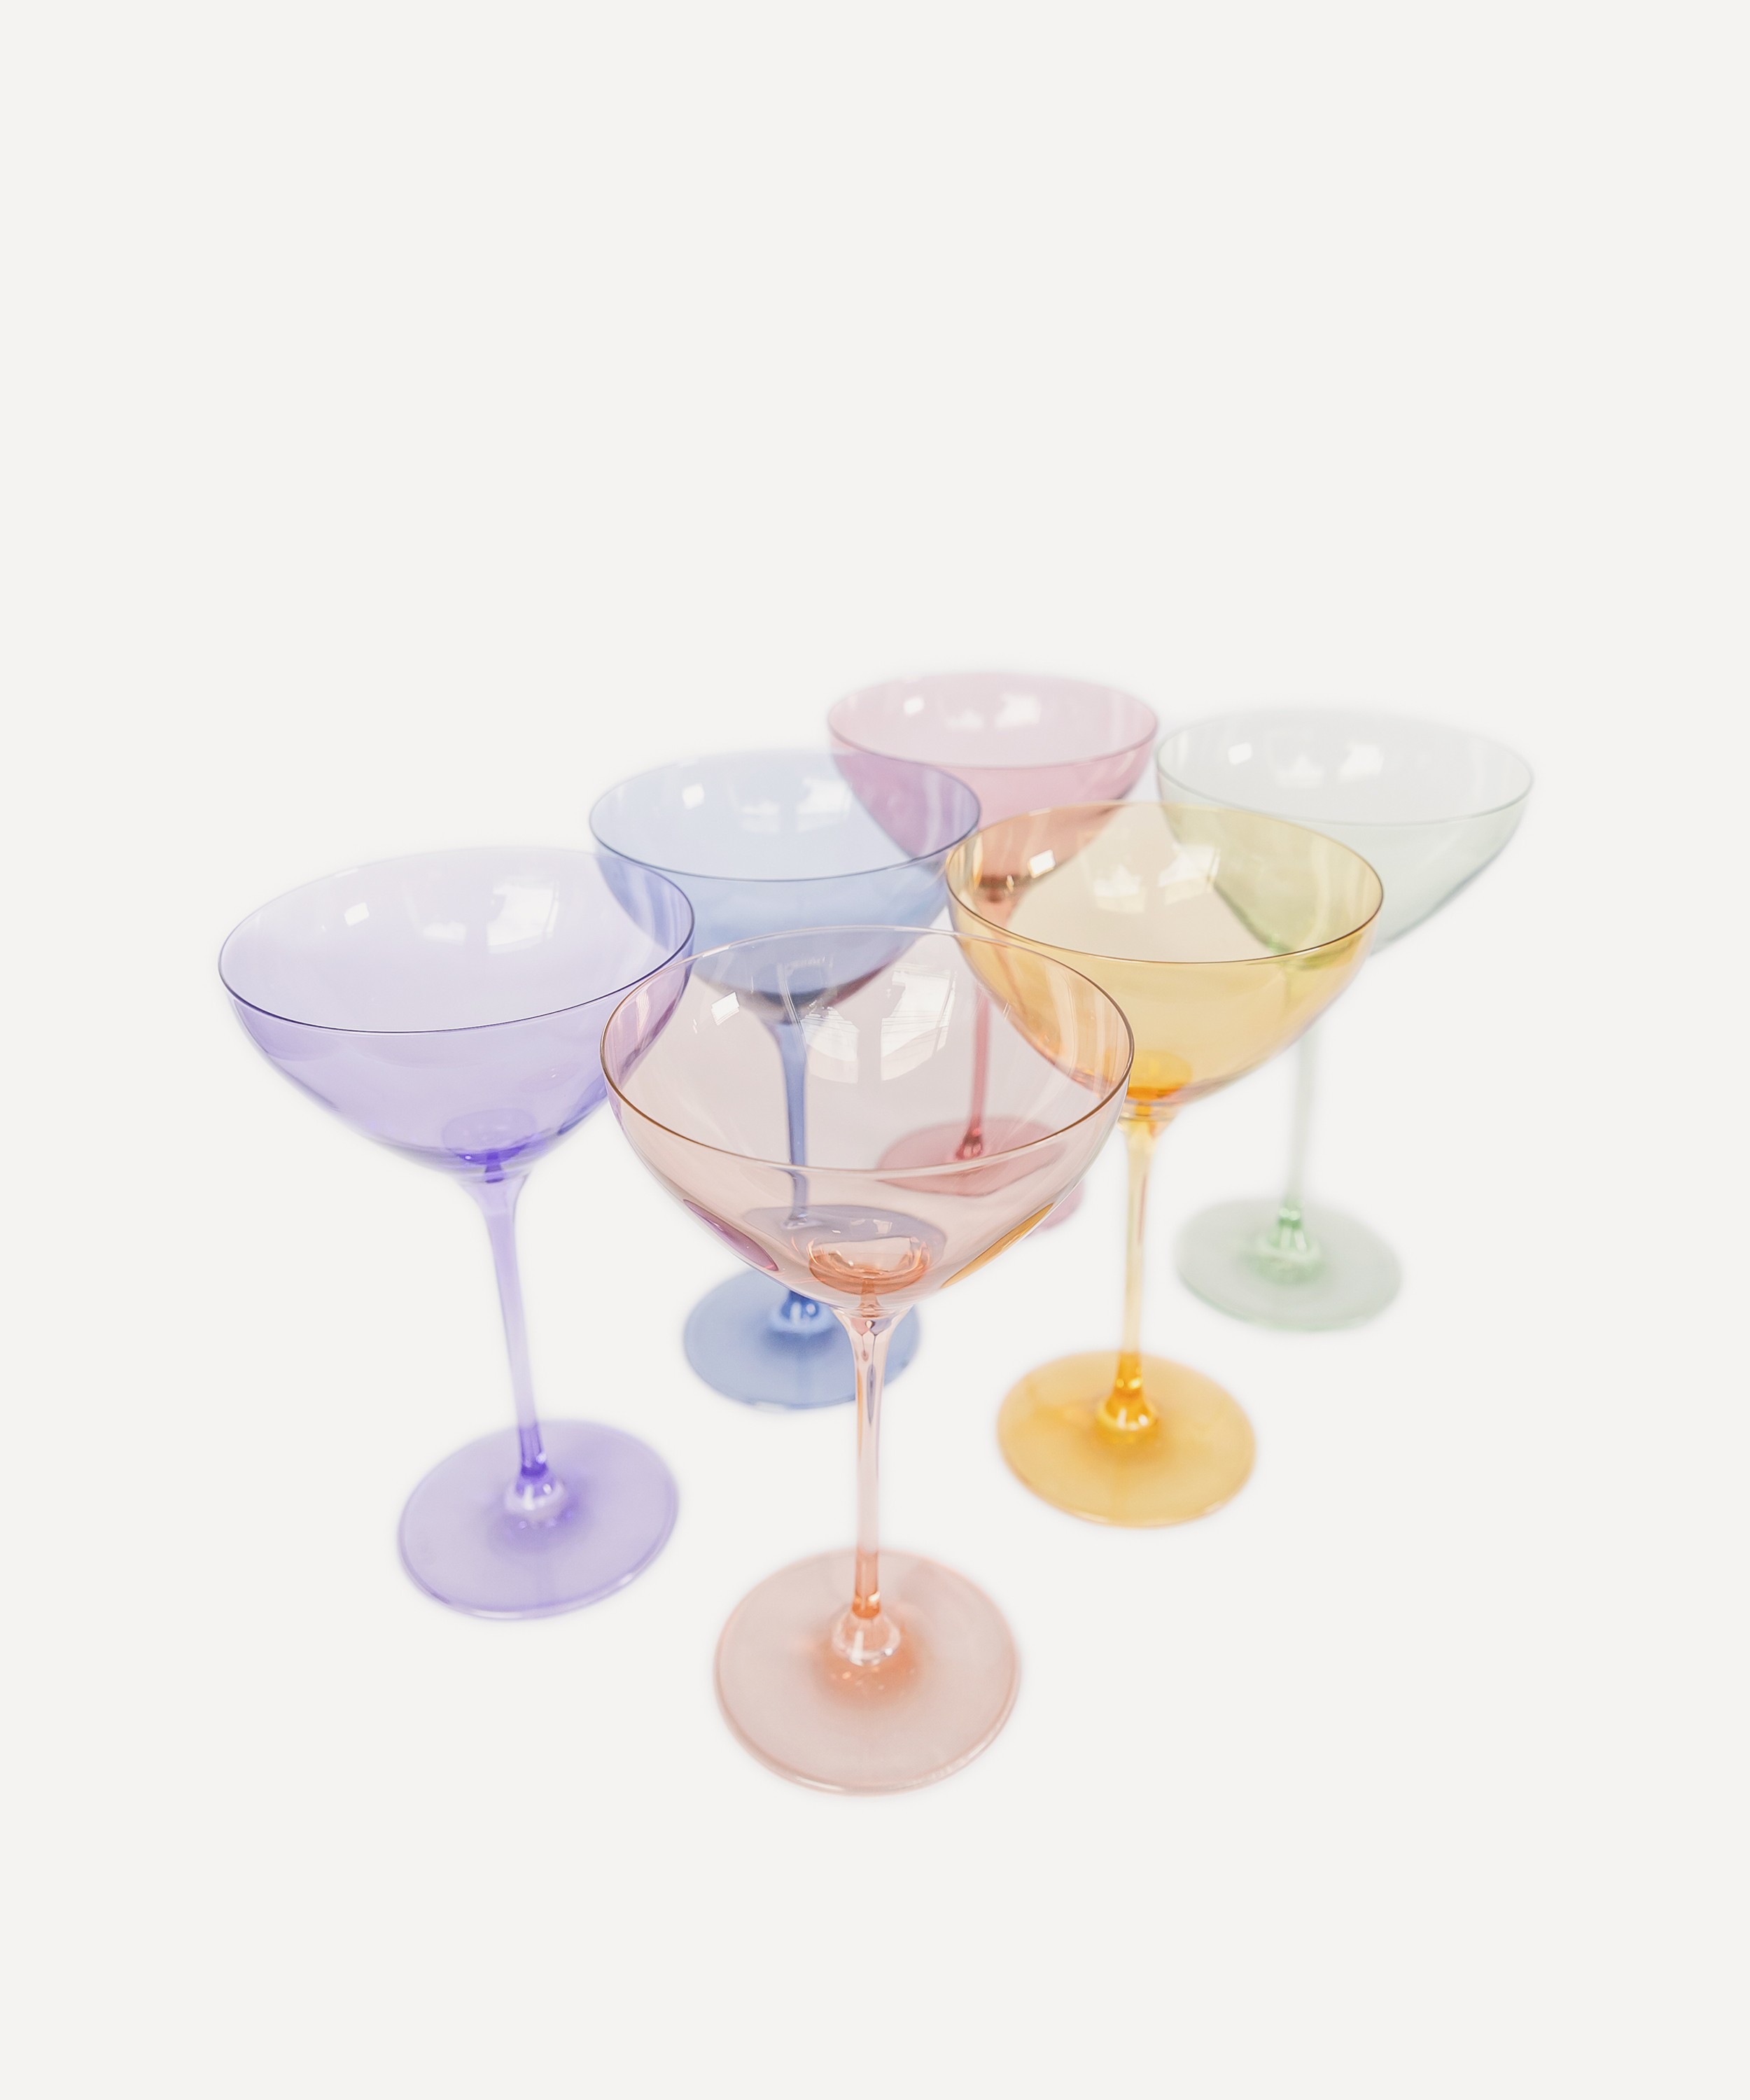 Unbreakable Pastel Color Acrylic Martini Glasses, Set of 6